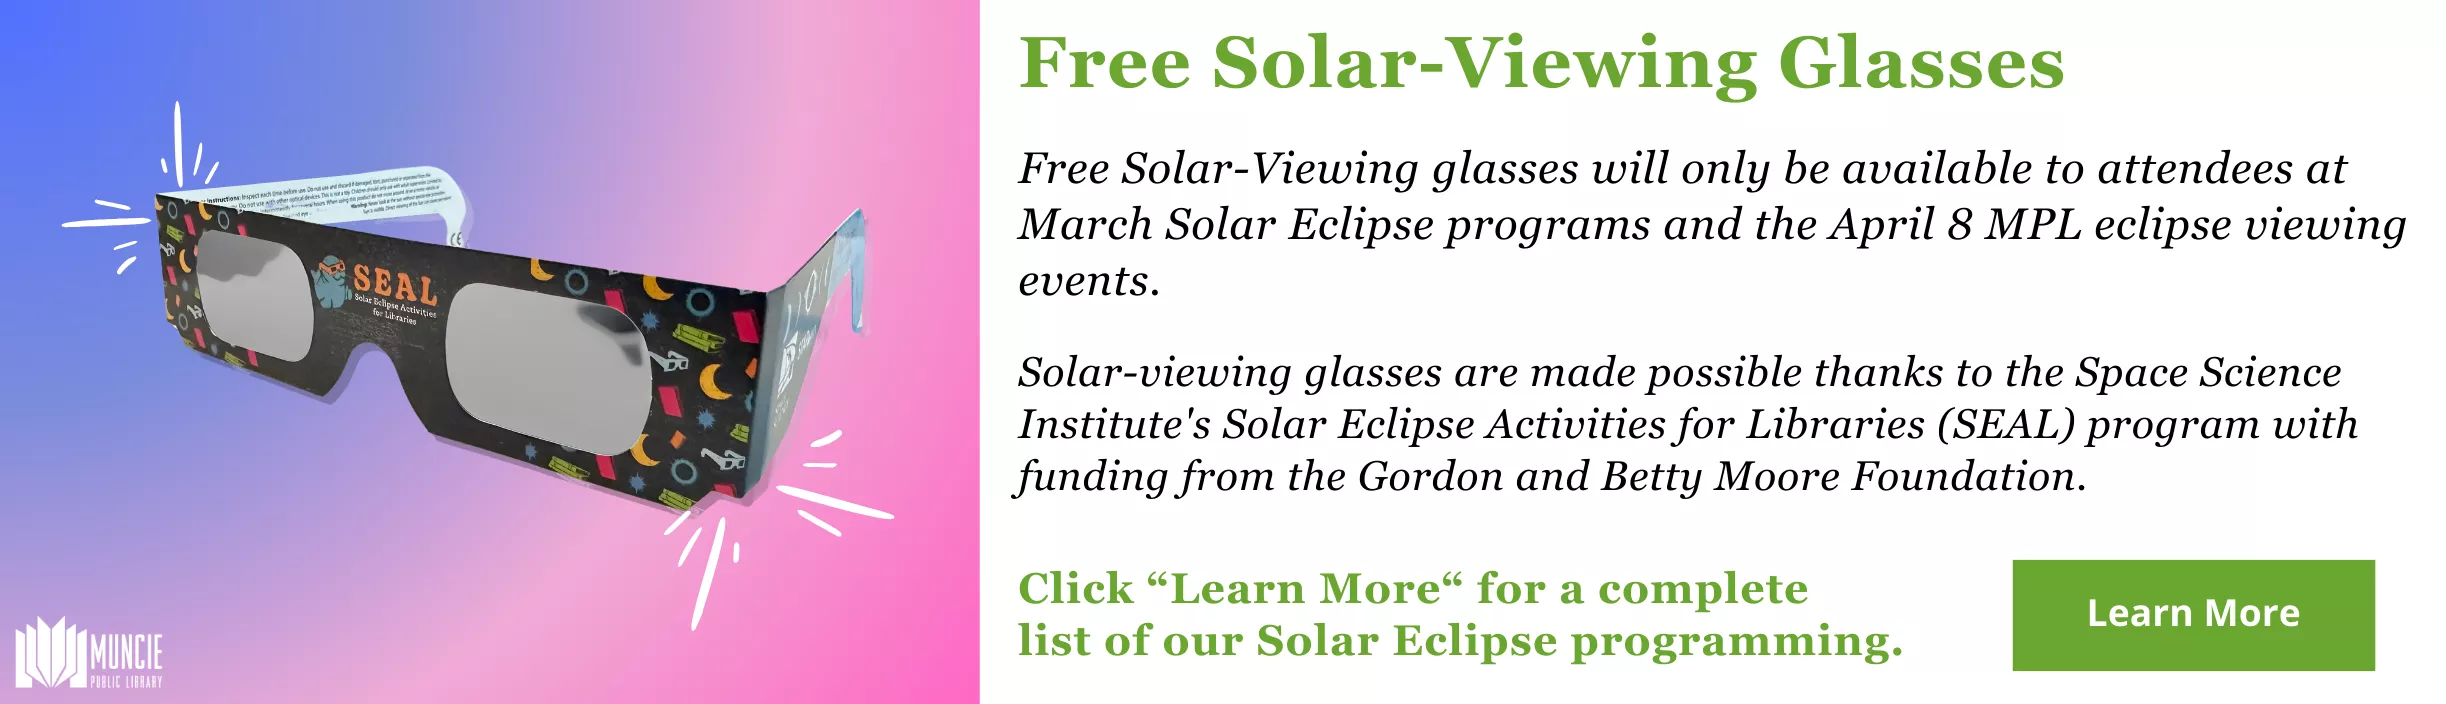 Free solar-viewing glasses for atendees of solar eclipse programs